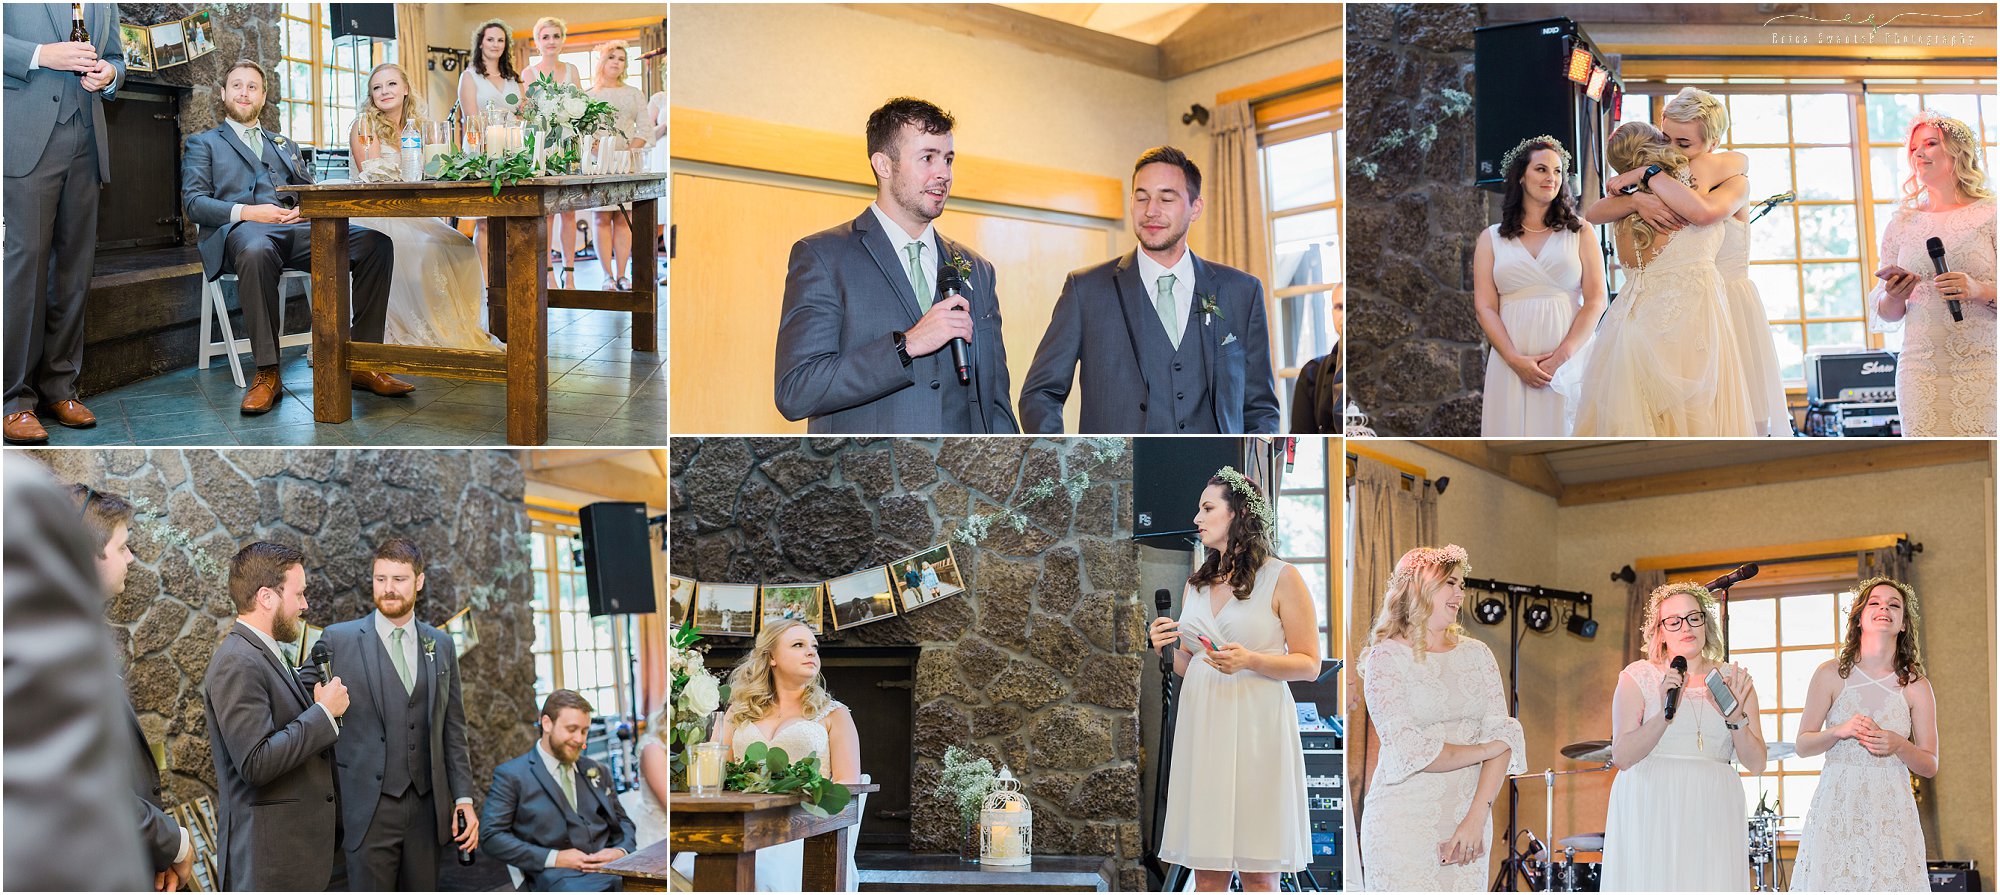 A wonderful wedding reception at Aspen Hall in Bend, OR. | Erica Swantek Photography